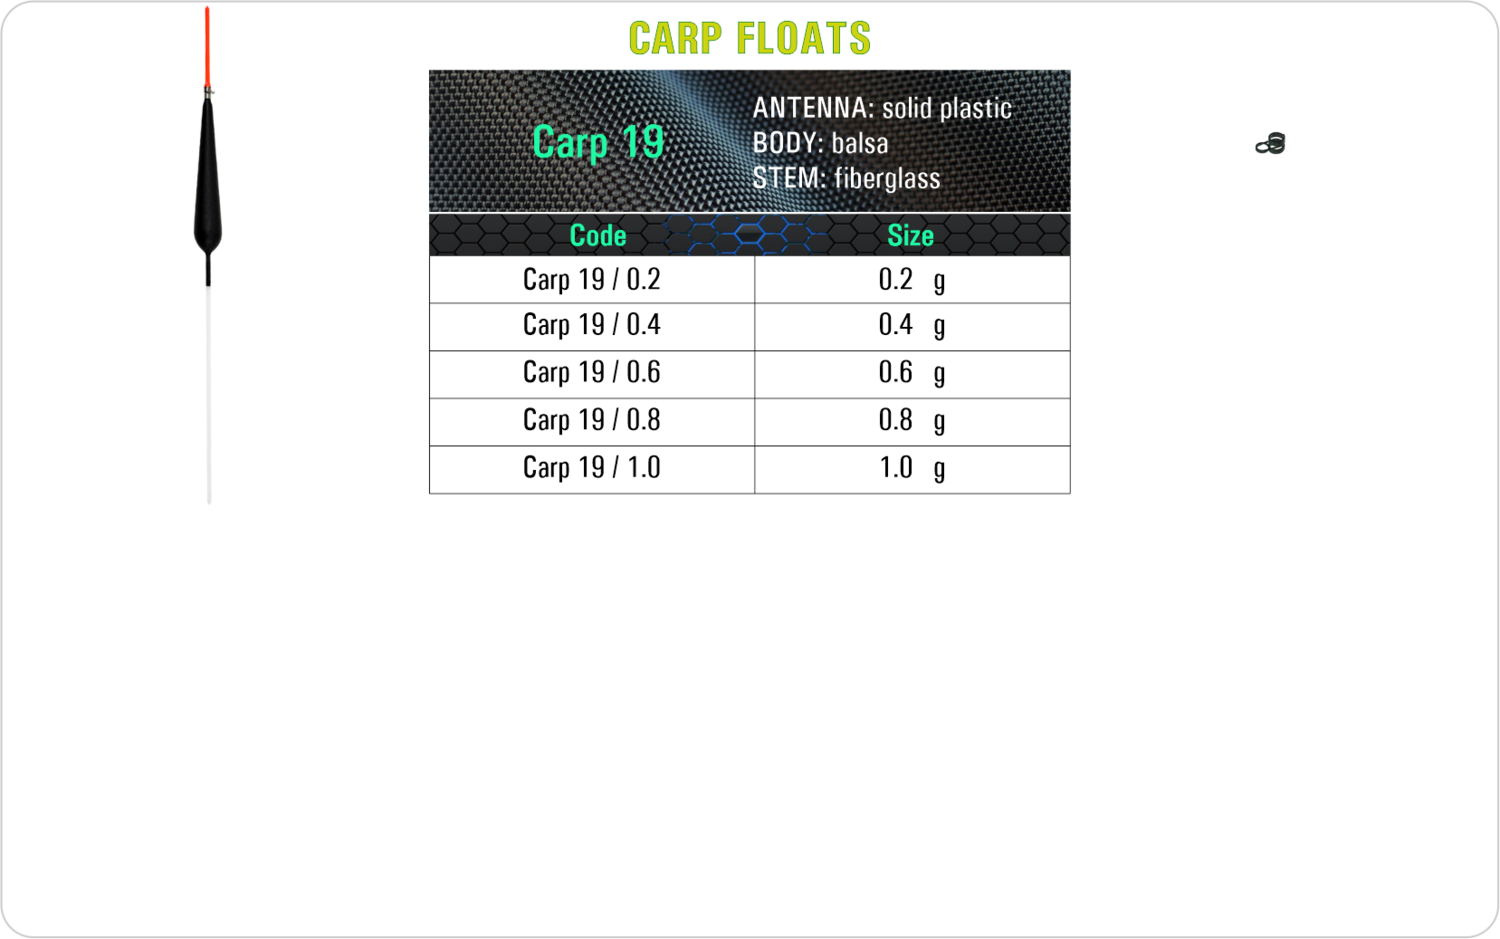 SF Carp 19 Carp float model and table containing an additional information about this float with different codes, sizes, types of the body, the stem and the antenna of the float.